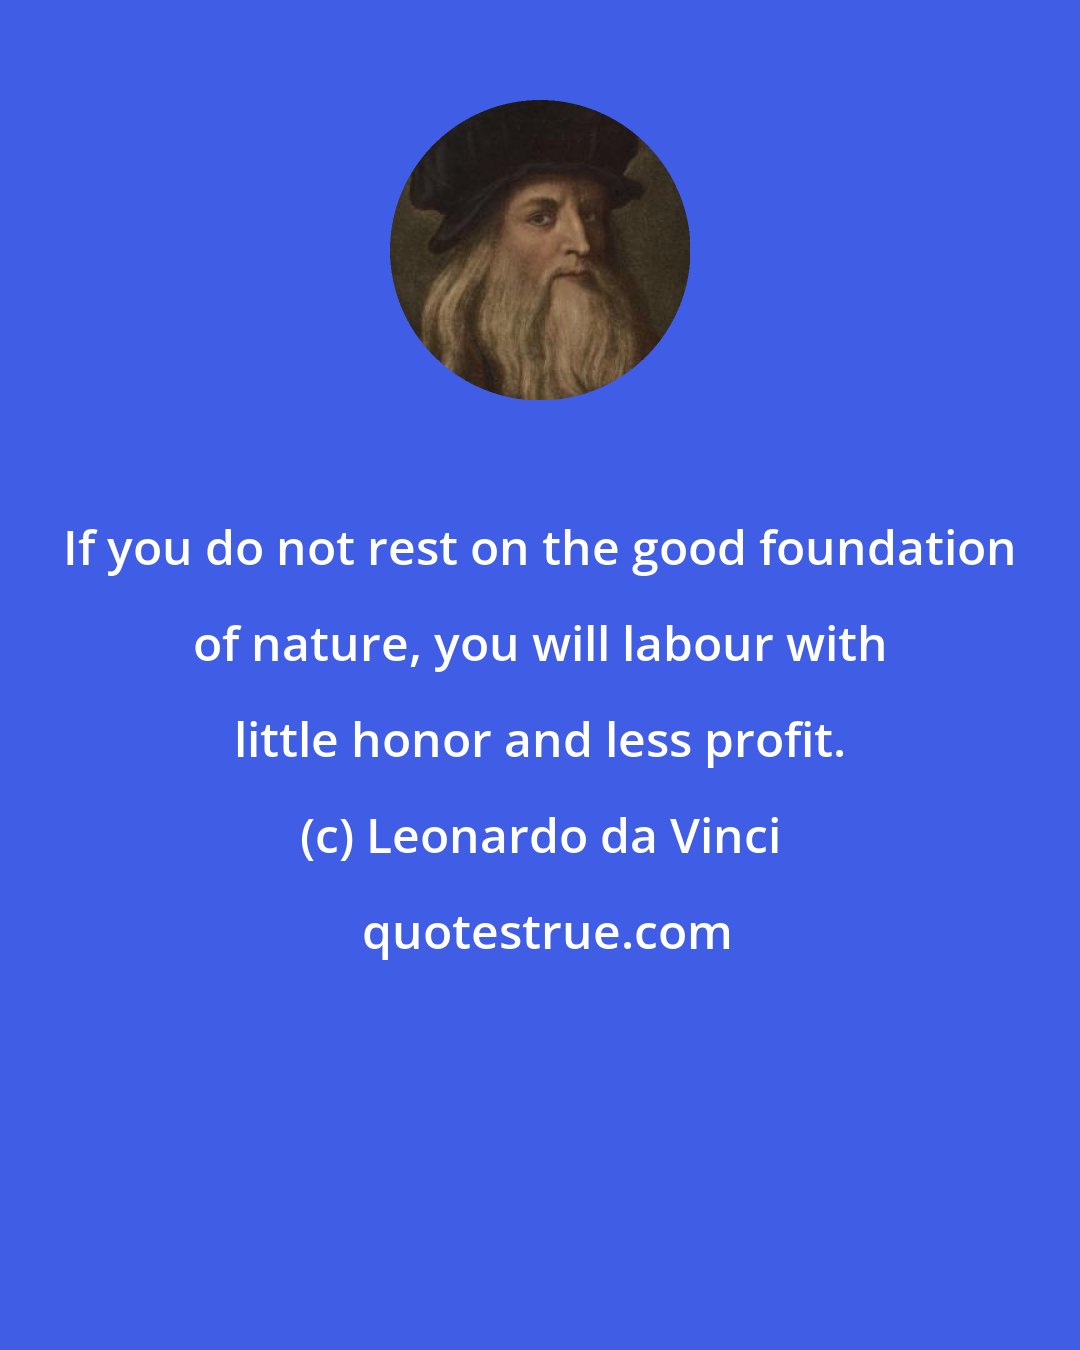 Leonardo da Vinci: If you do not rest on the good foundation of nature, you will labour with little honor and less profit.